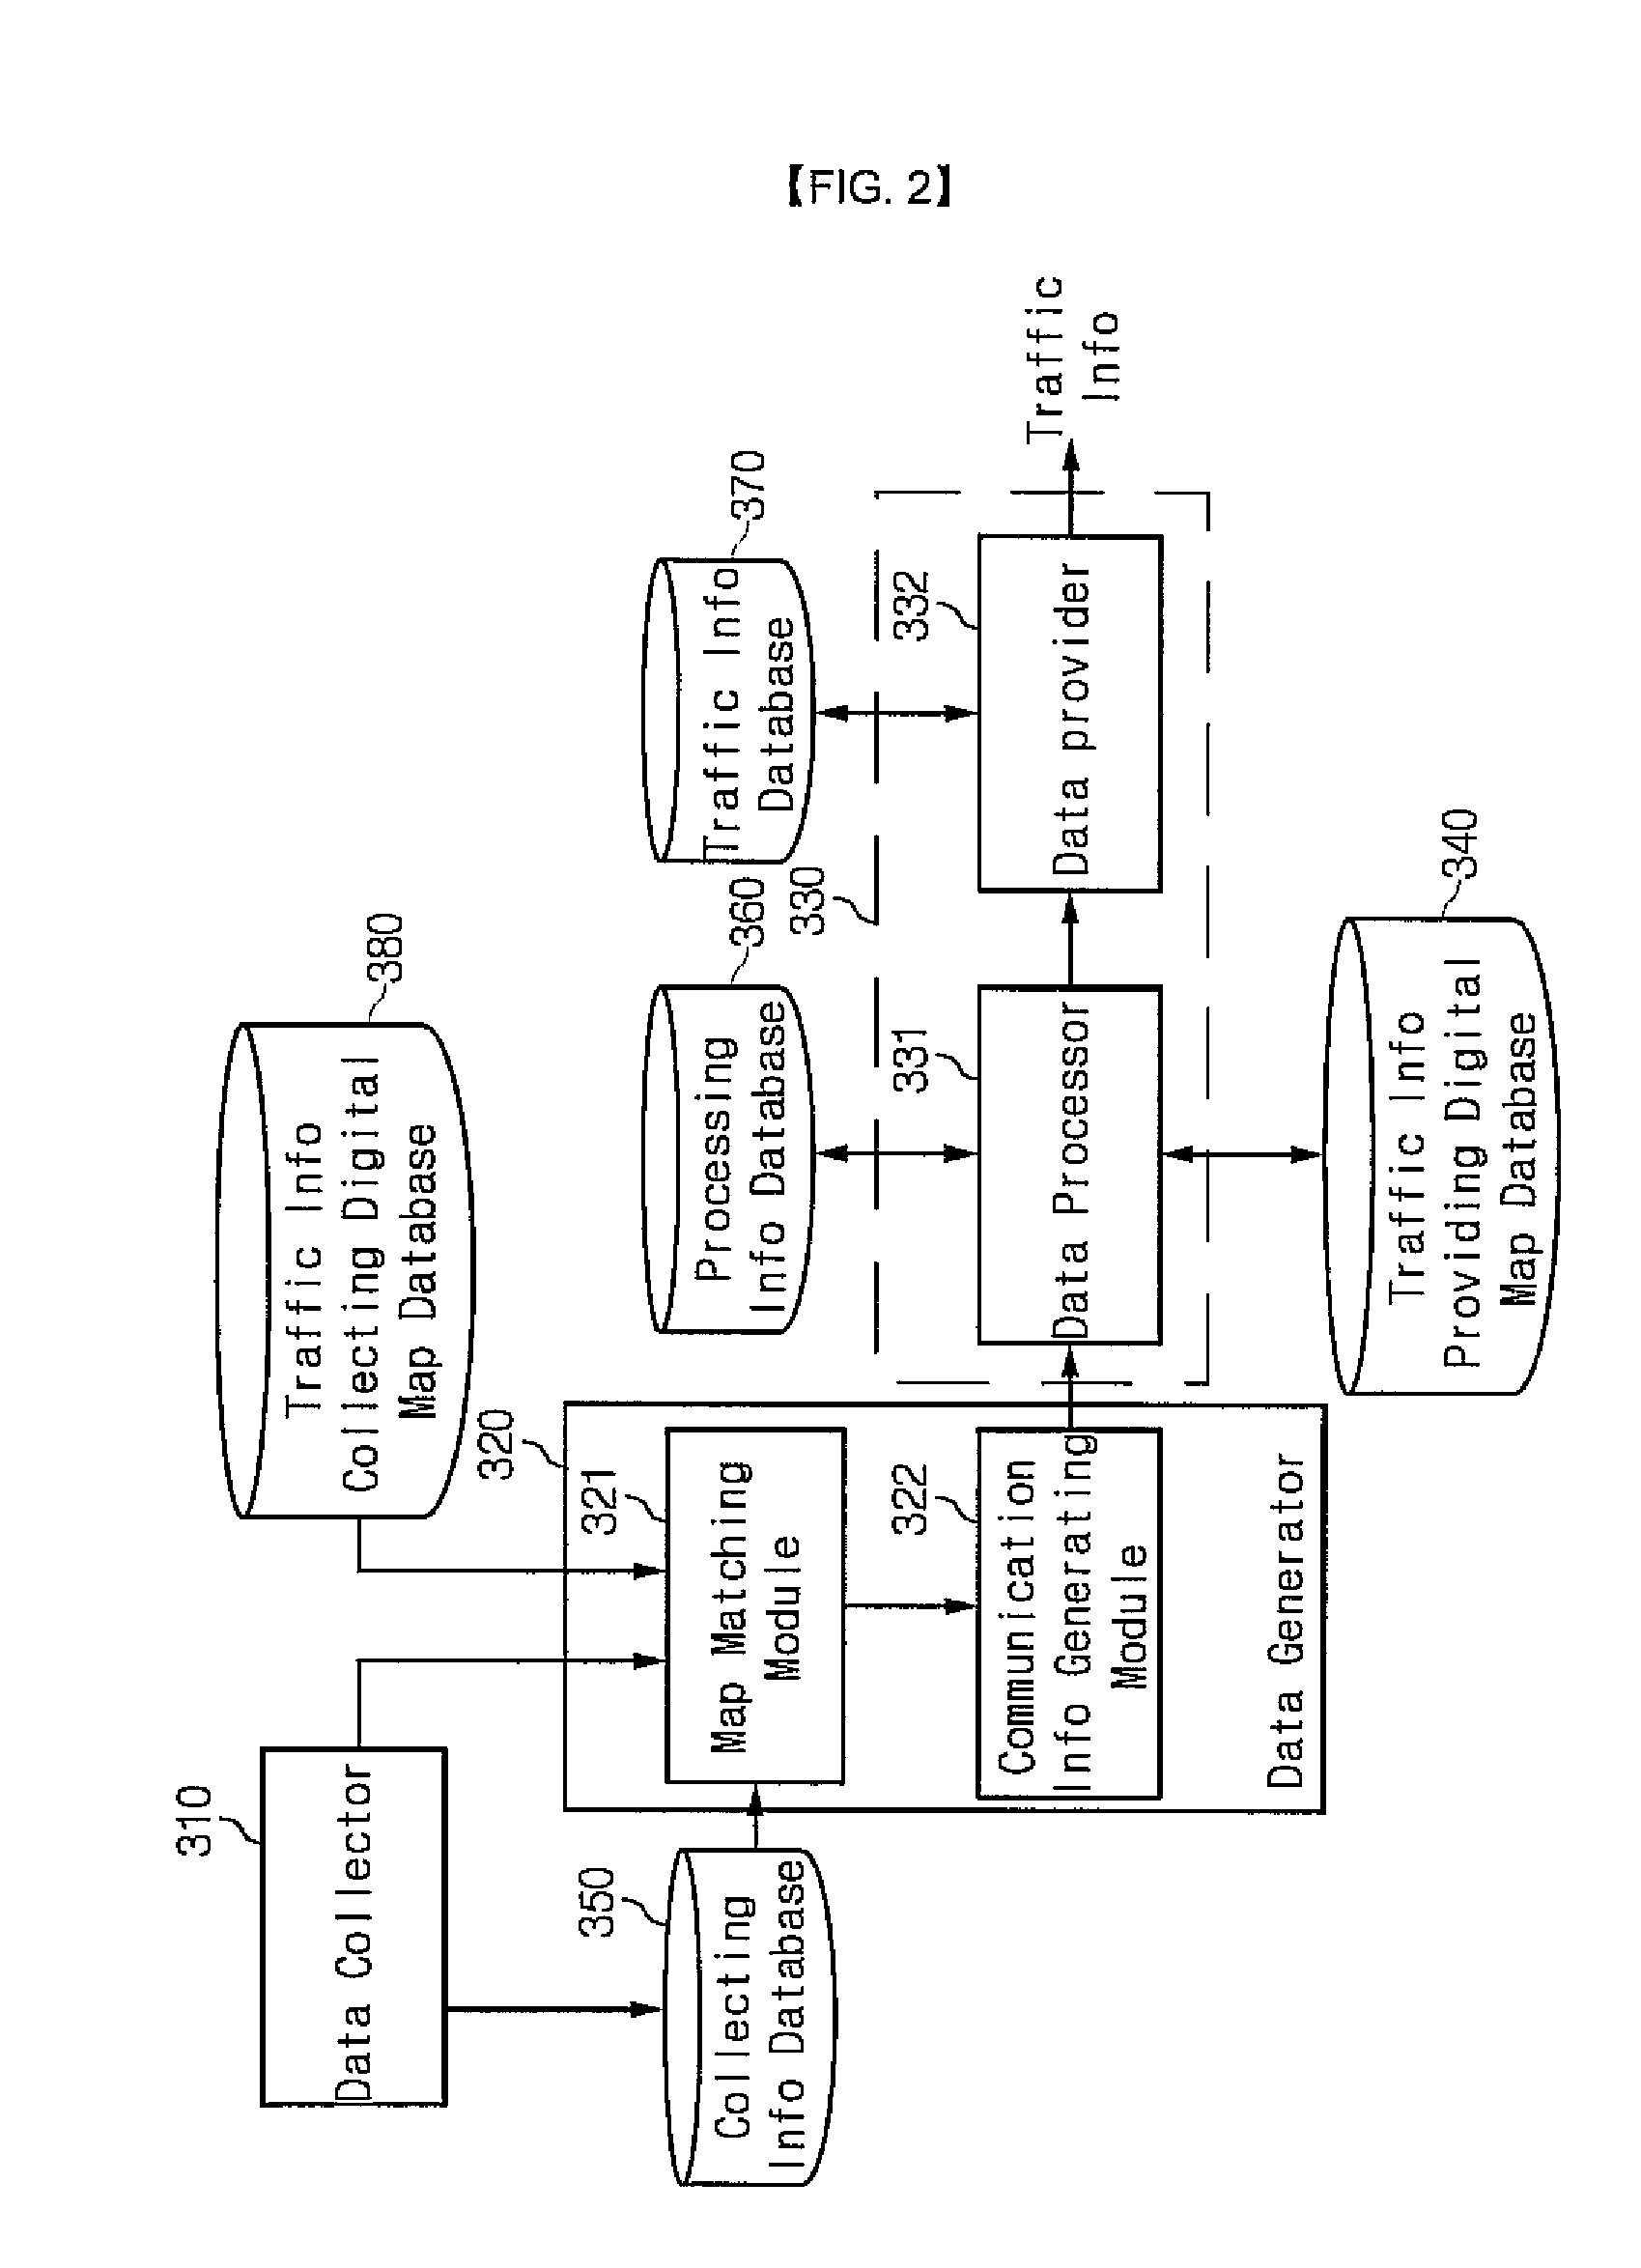 Traffic information providing system using digital map for collecting traffic information and method thereof